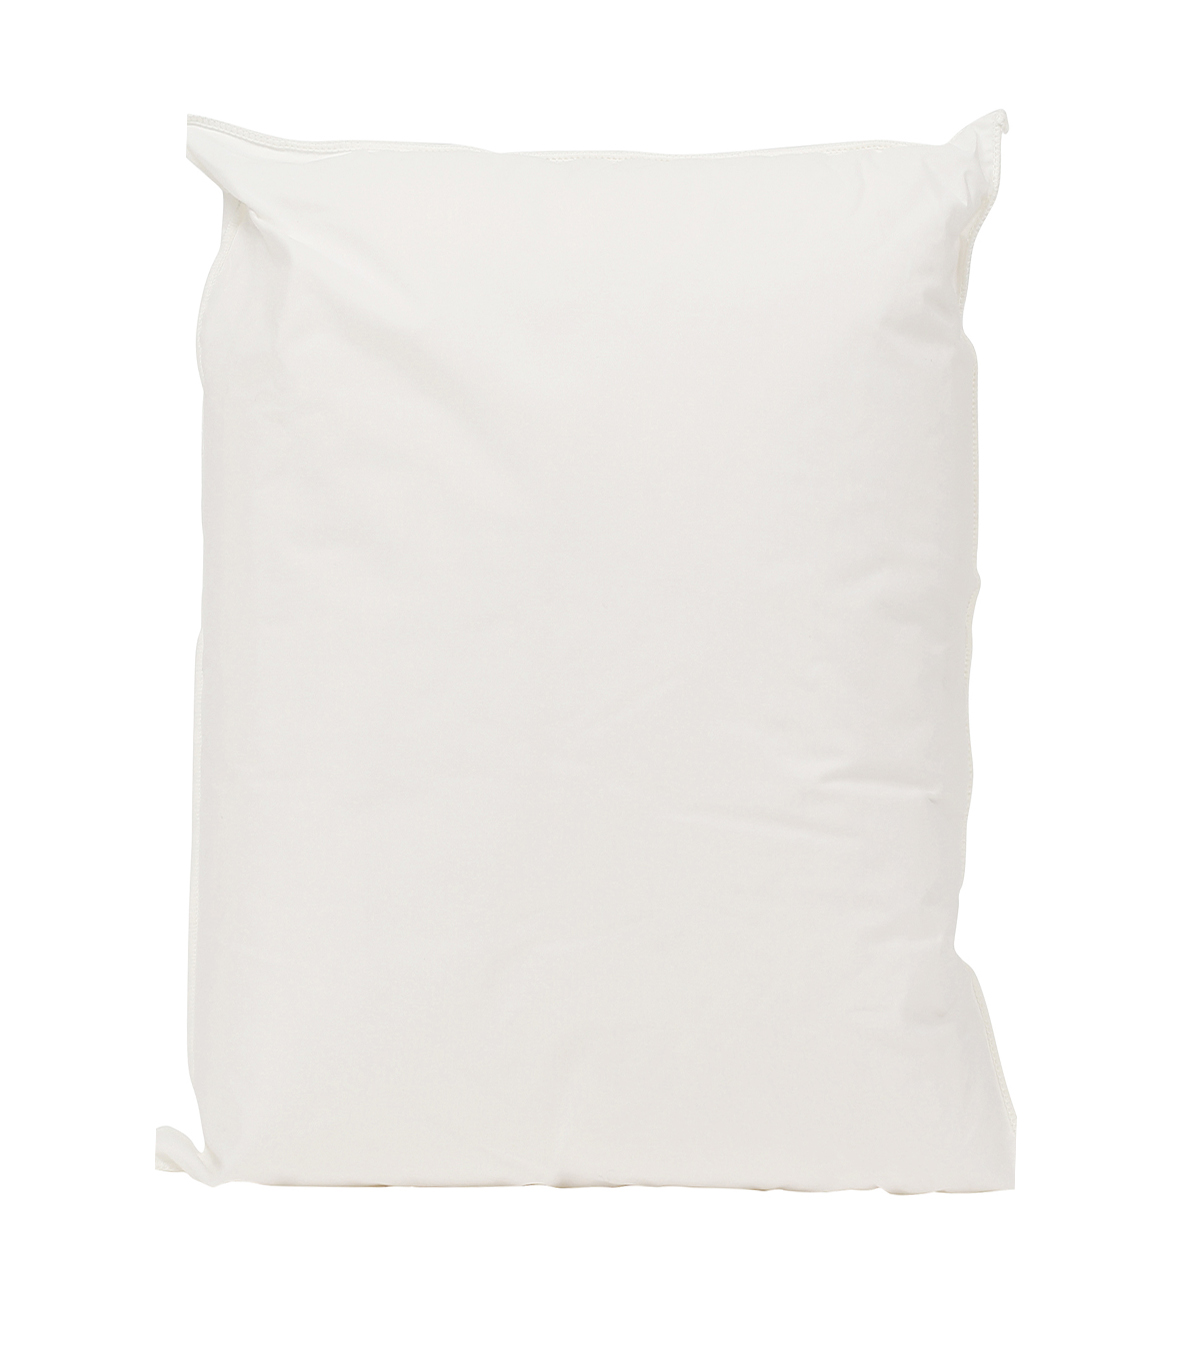 Poly-Fil® Crafter's Choice® Rectangular Pillow Insert by Fairfield™, 12" x 16" - image 2 of 5